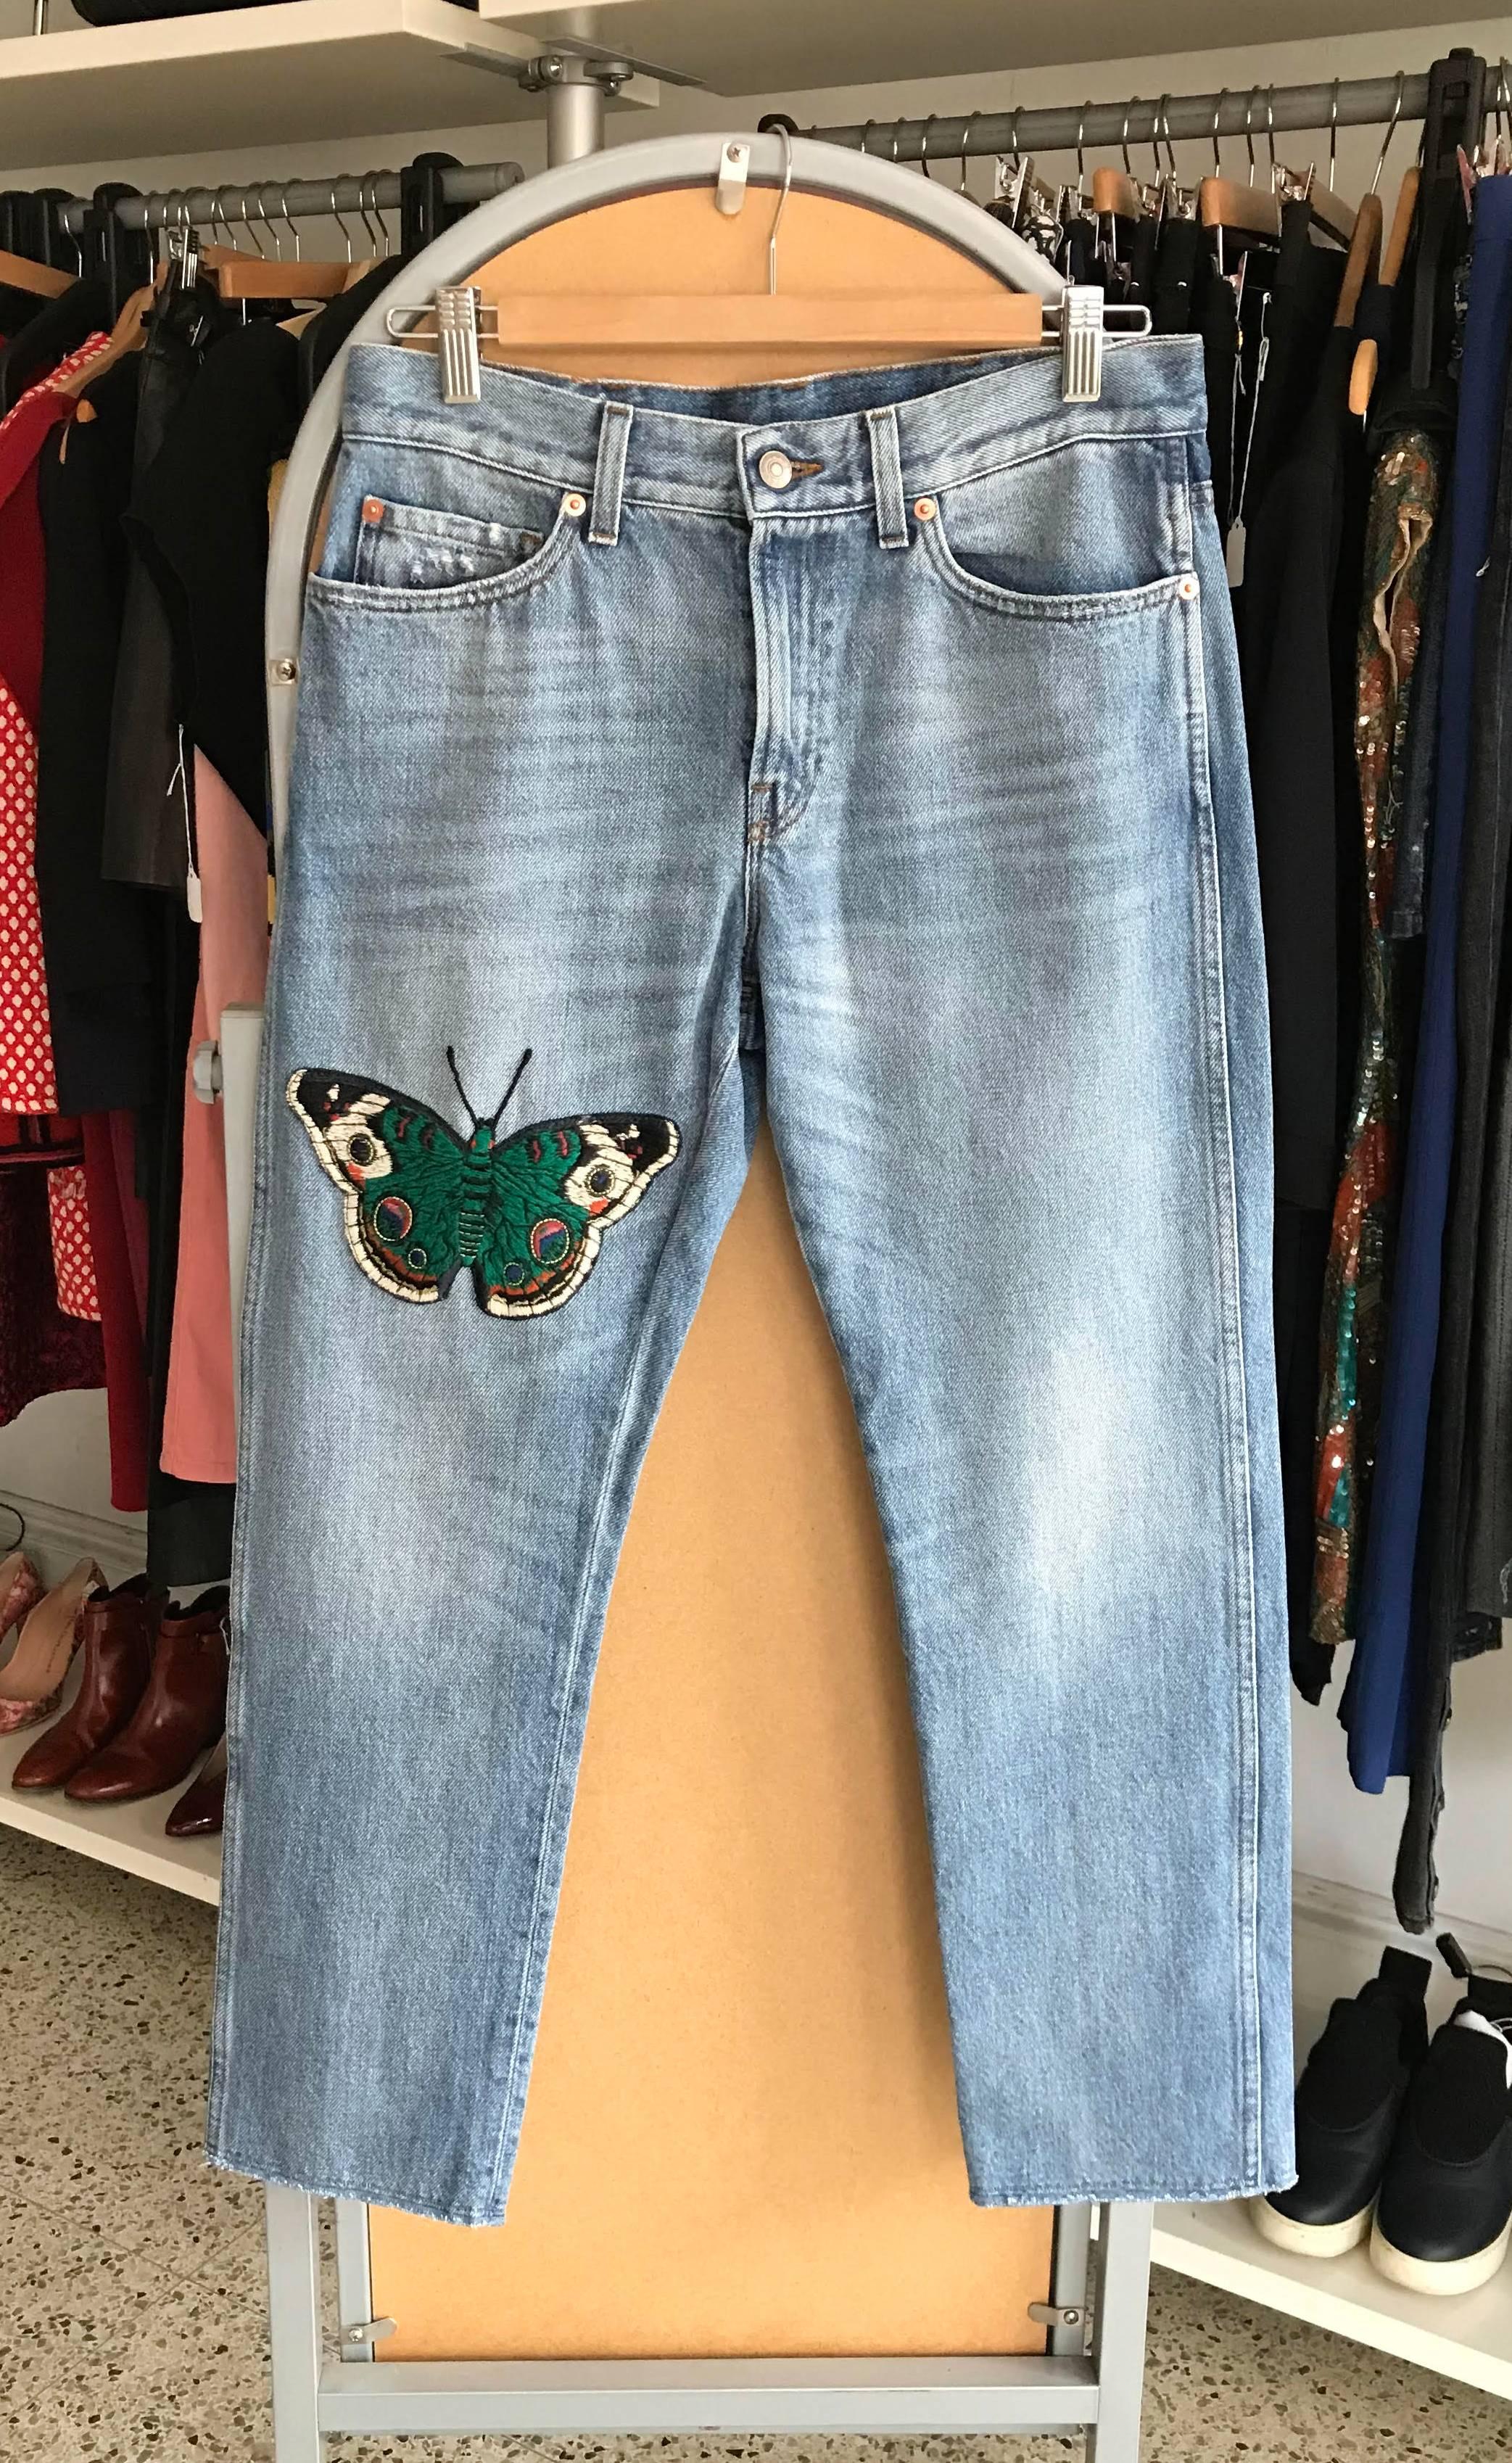 Gucci Alessandro Michele Butterfly Patch Blue Denim jeans.  Tagged size 25 (Best for USA 0 / 2 or jeans size 25). Garment hip measures 35